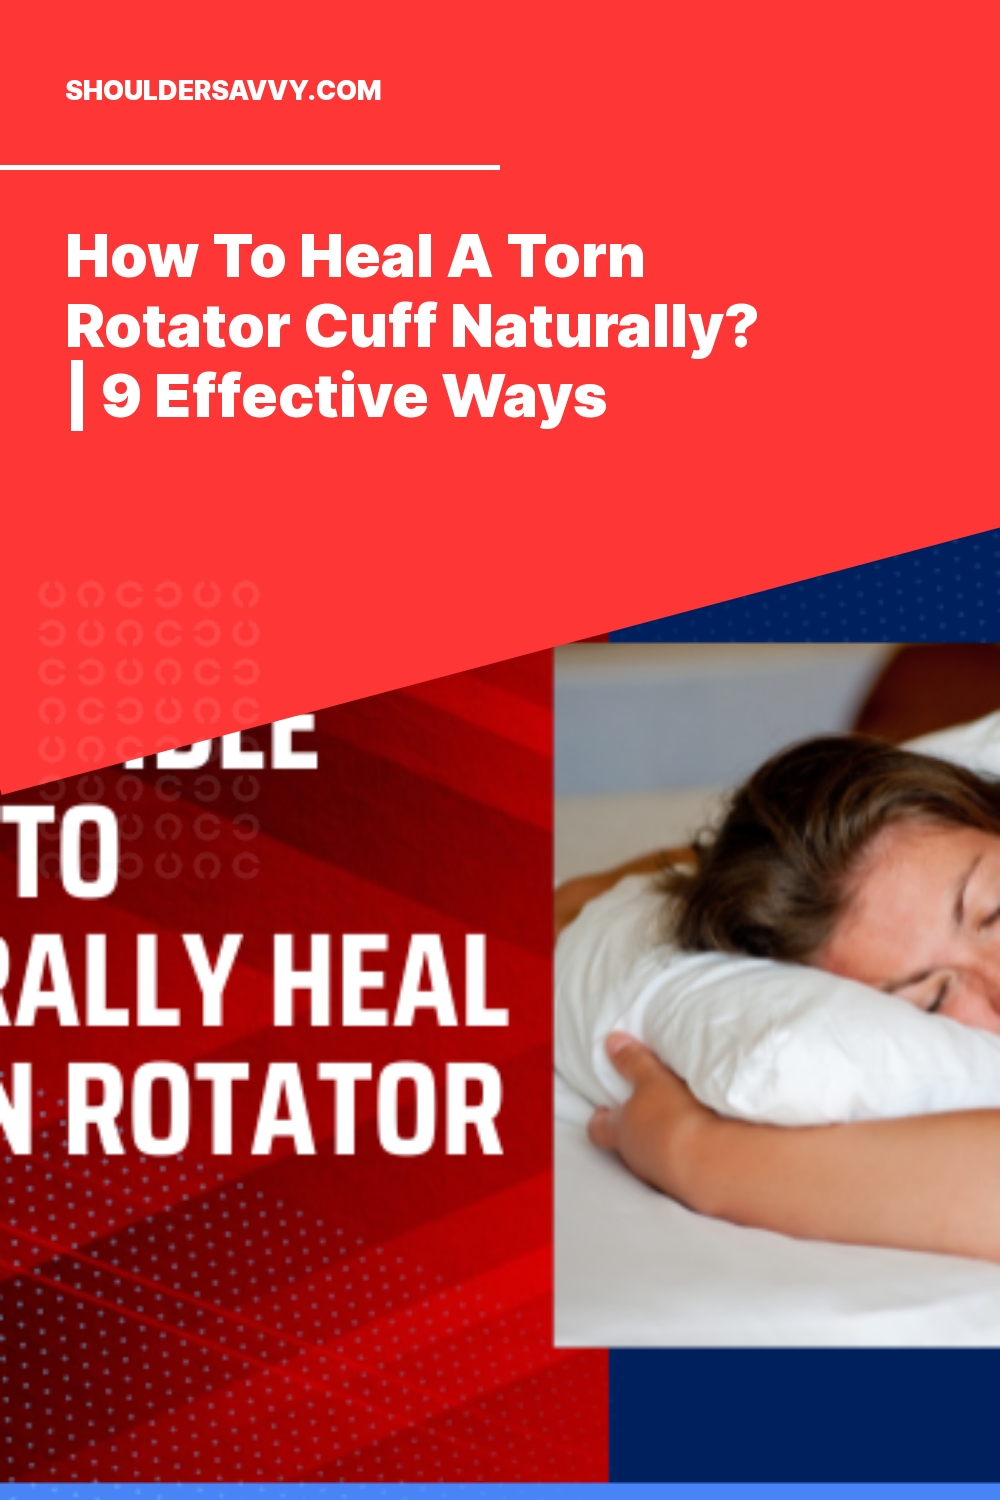 How To Heal A Torn Rotator Cuff Naturally? | 9 Effective Ways